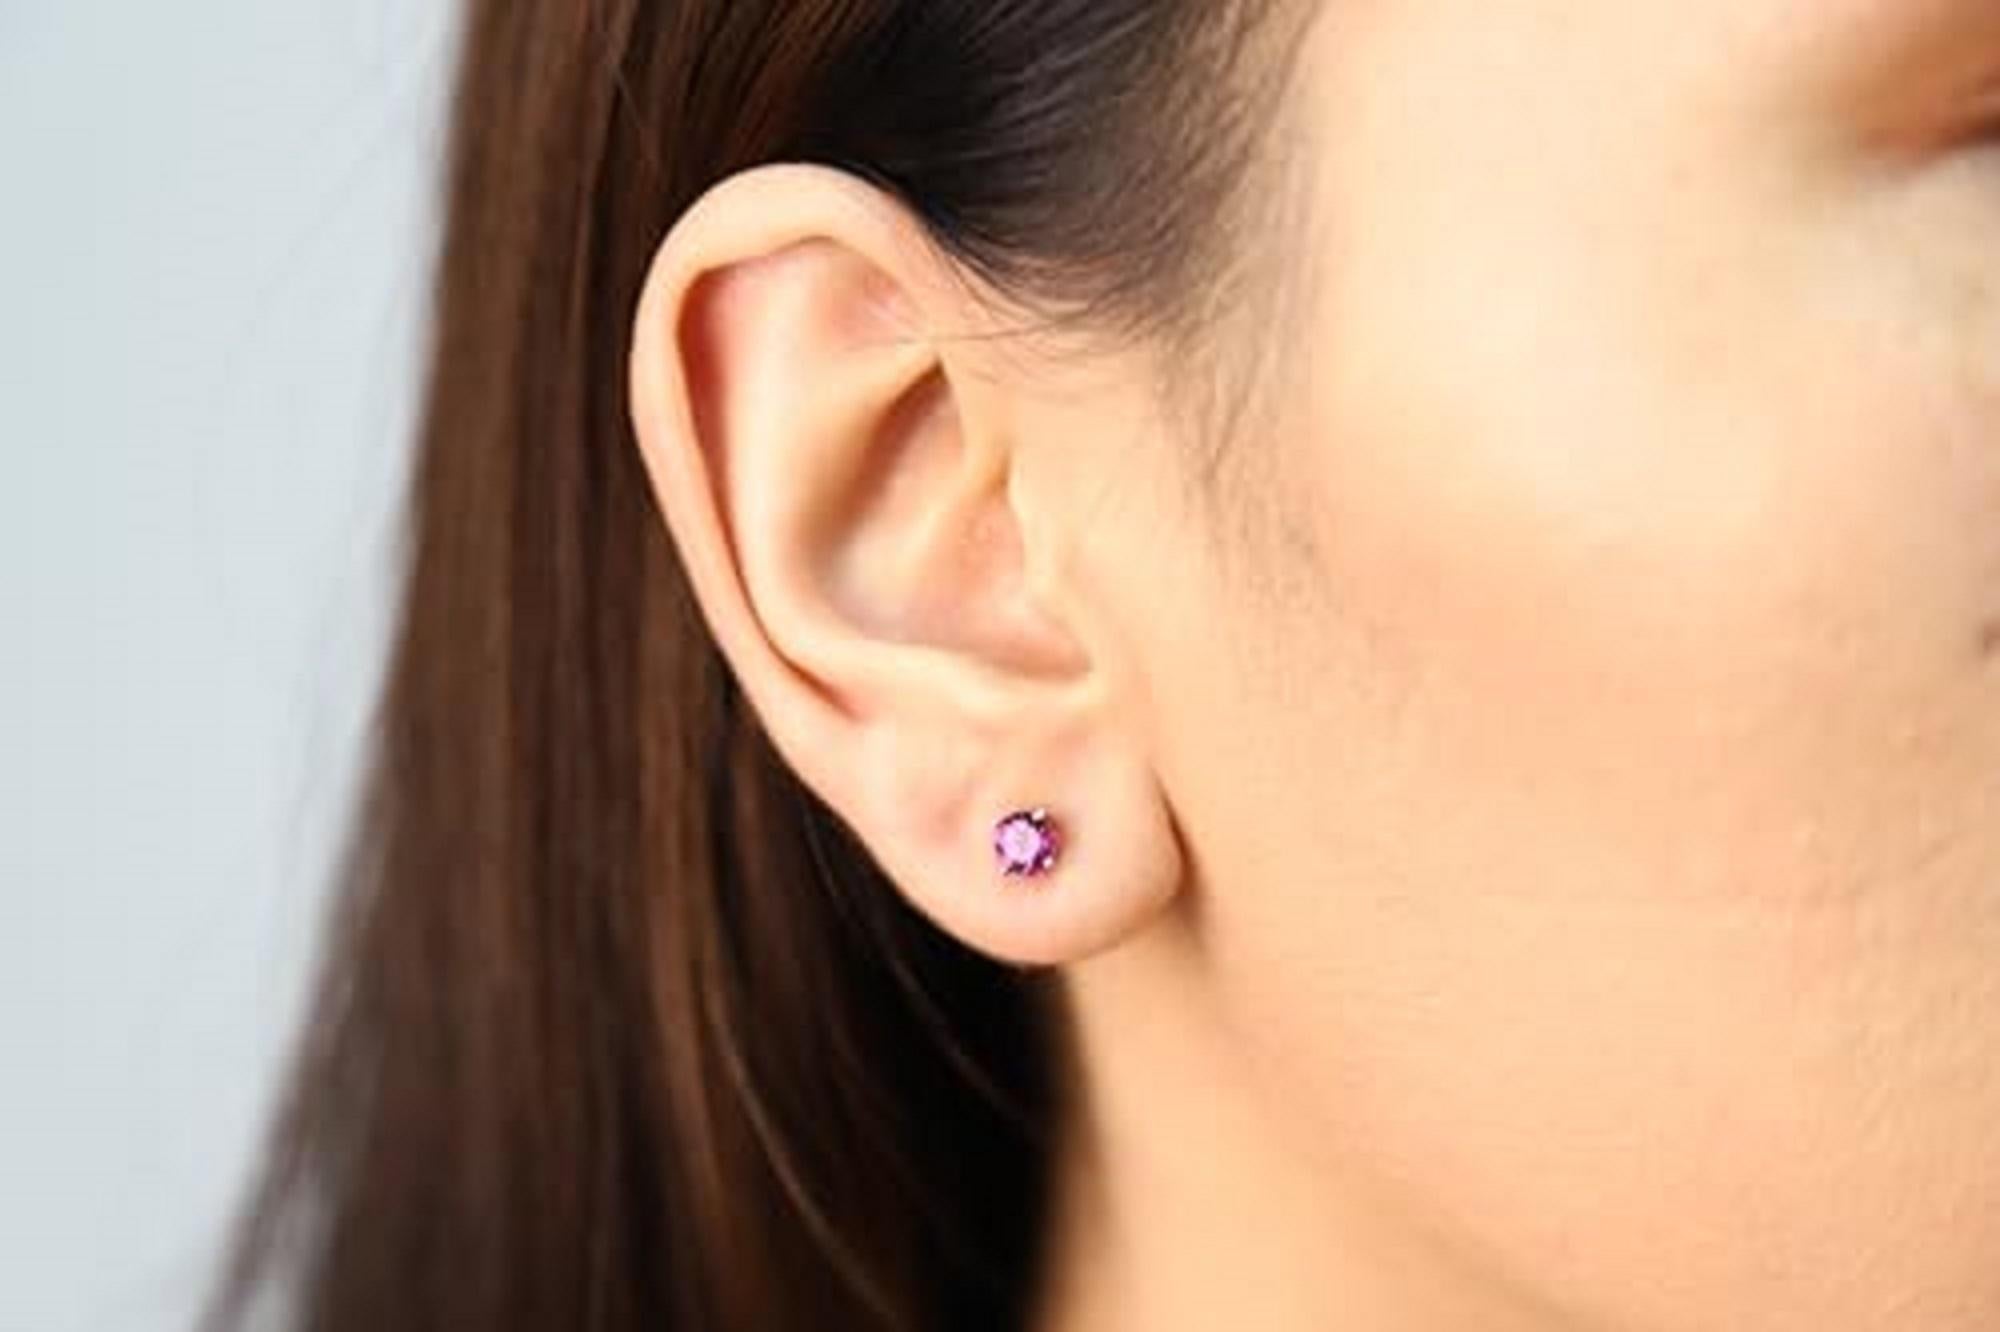 Stunning, timeless and classy eternity Unique Earring. Decorate yourself in luxury with this Gin & Grace Earring. The 10K Rose Gold jewelry boasts Round-Shape Prong Setting Purplish Pink Natural Garnet (2 pcs) 1.19 Carat, accent stones for a lovely